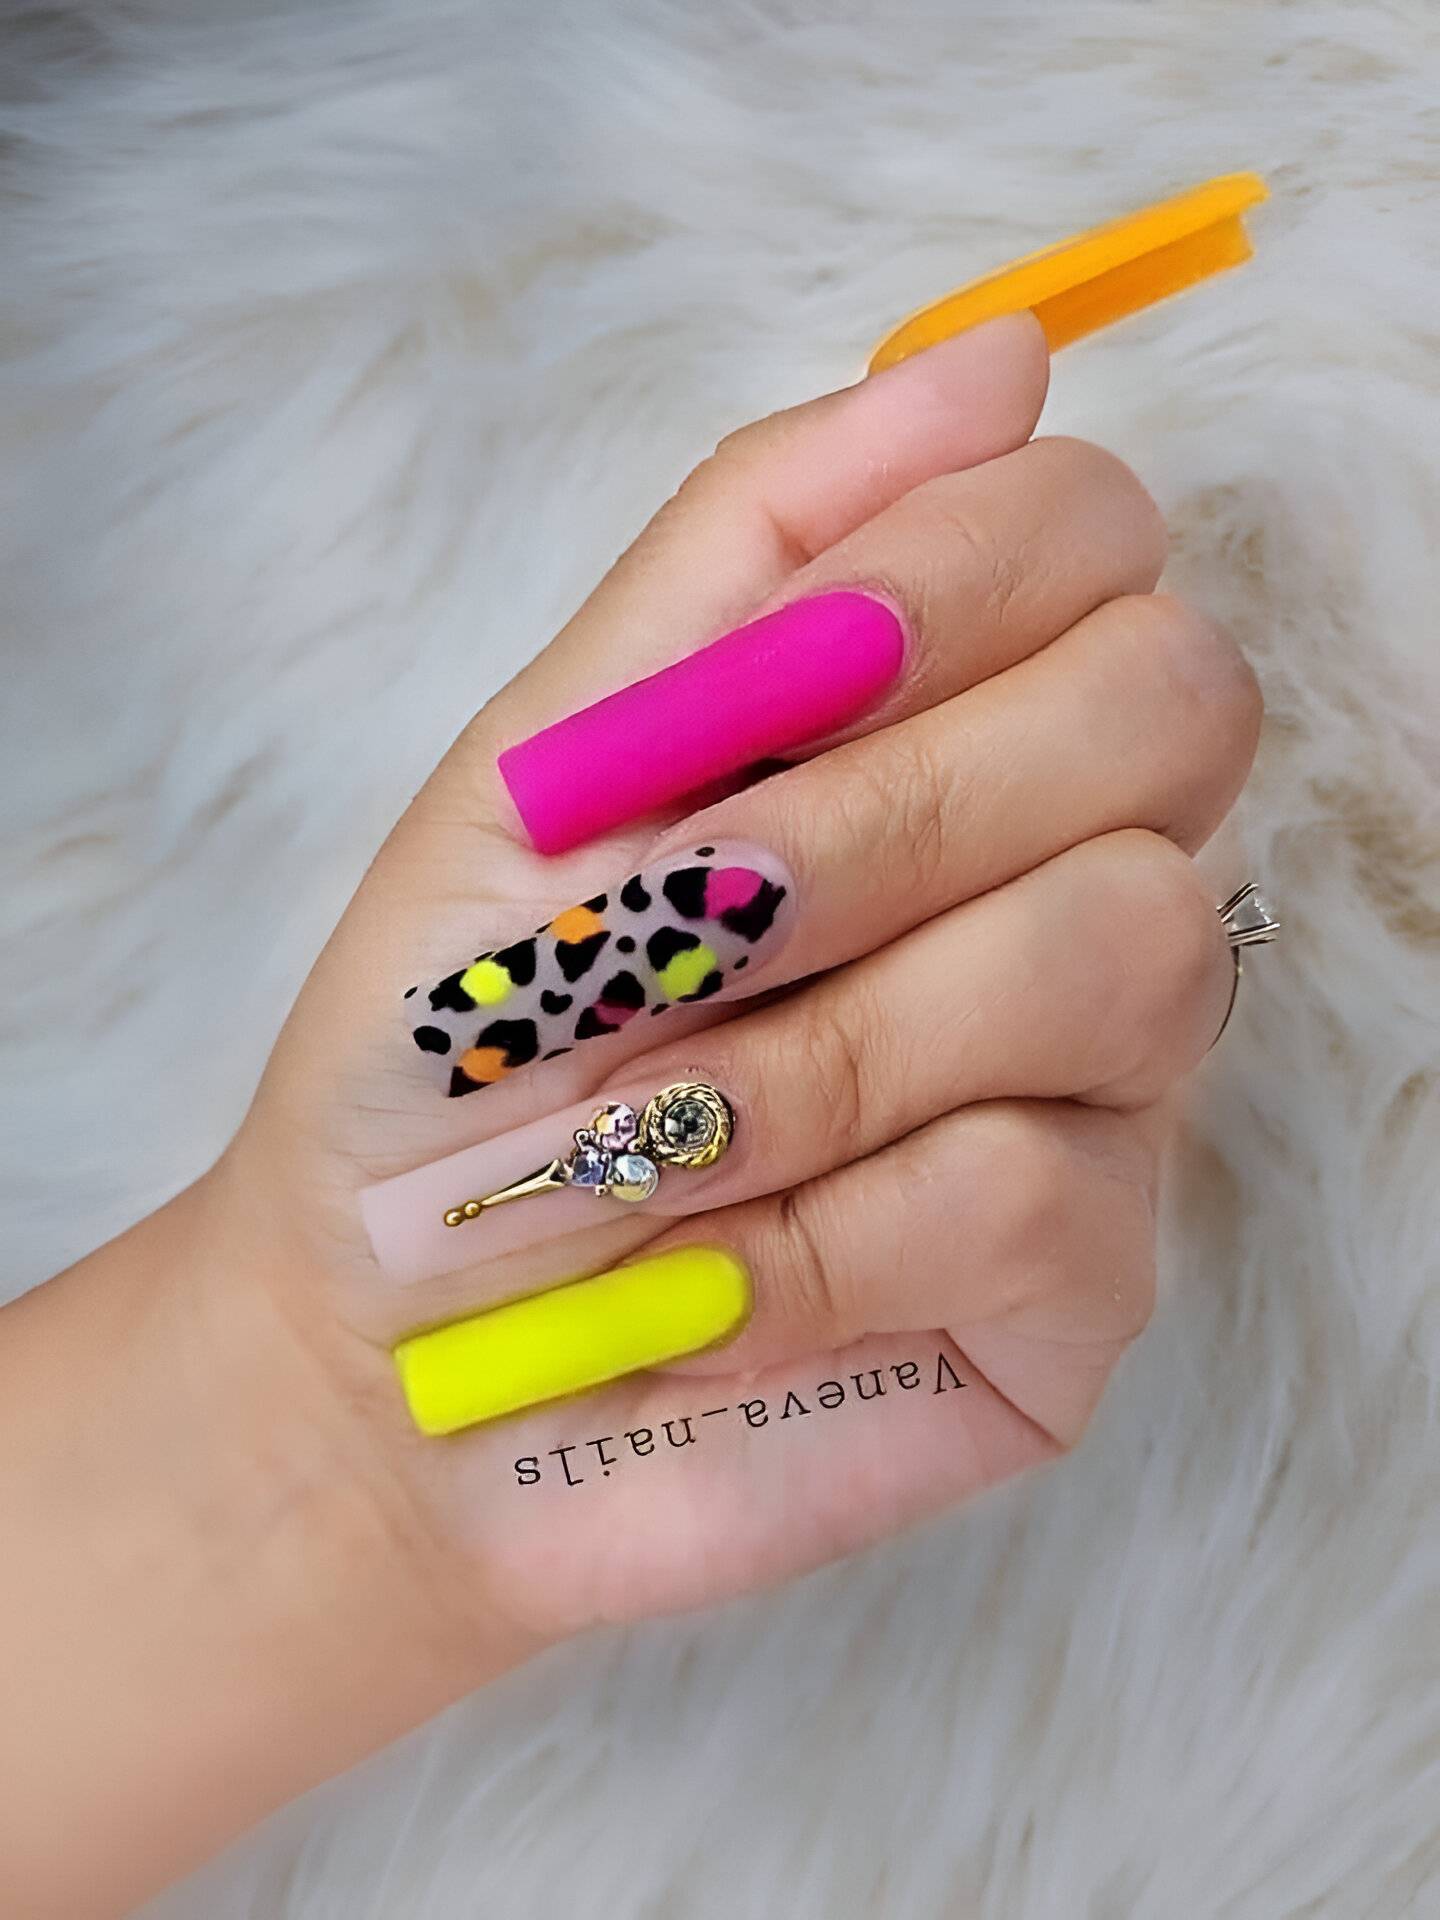 30 Colorful Nail Art Designs To Have Fun And Stay Fabulous - 235